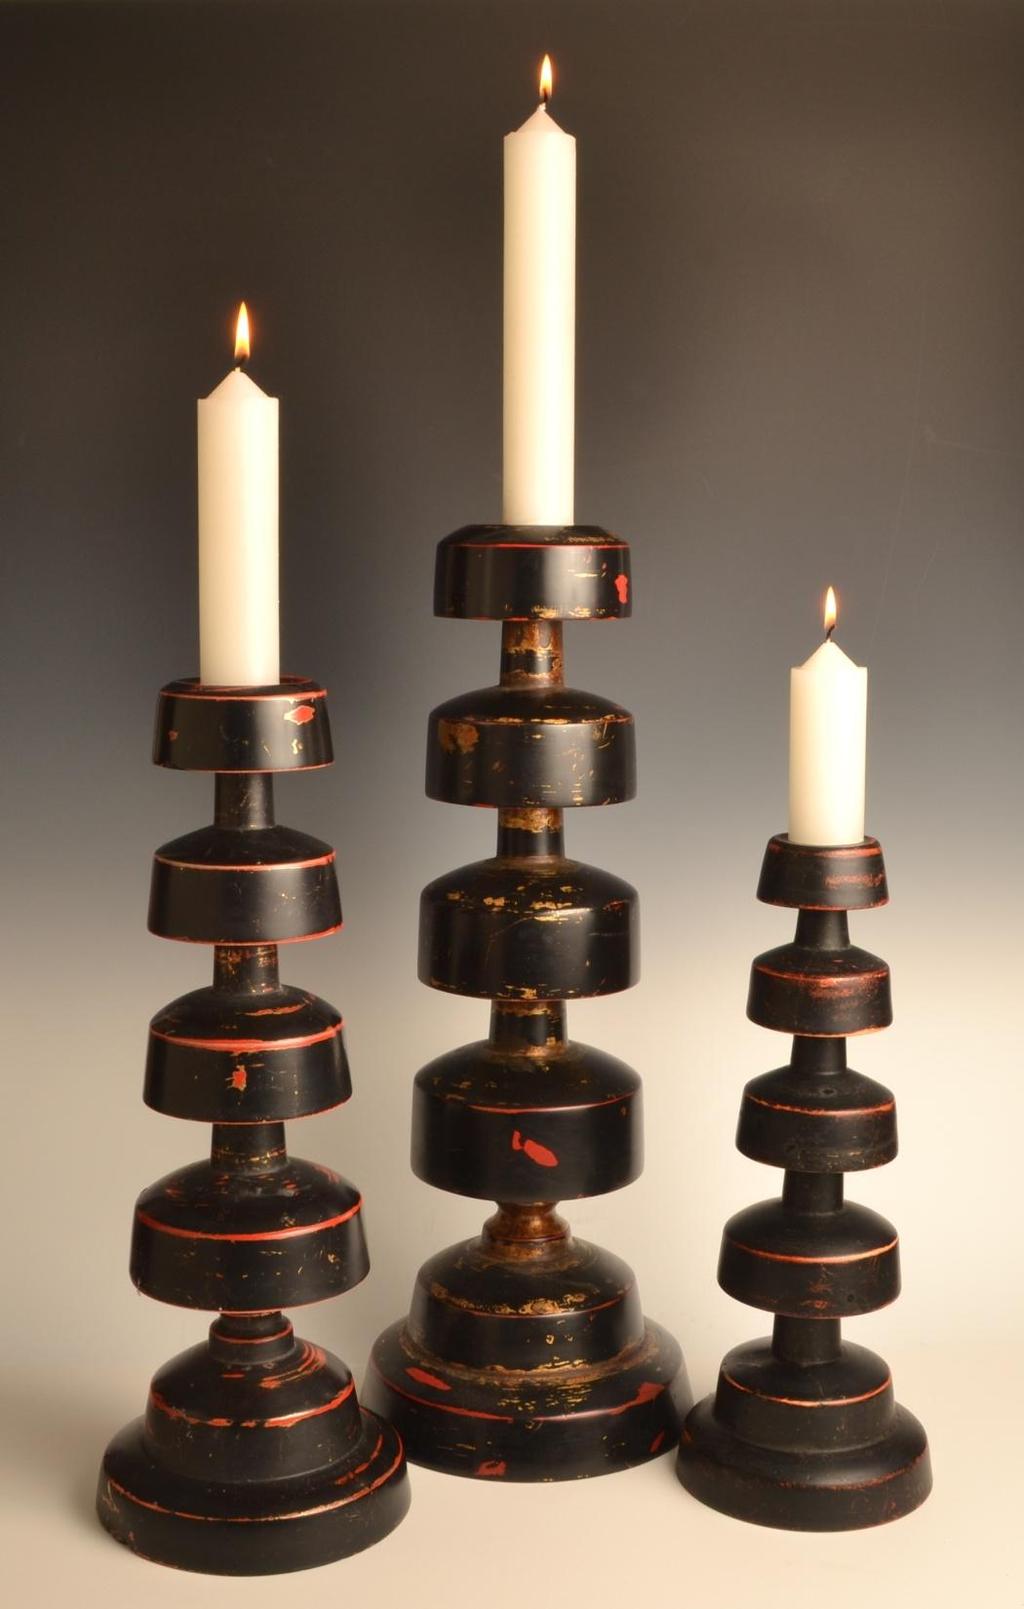 Title: Ceremonial Candlestick Trio (15-006) Created: July 2014 Materials: Mahogany, 23k gold leaf, lacquer Dimensions: 19 h X 7 w, 17 h X 6.